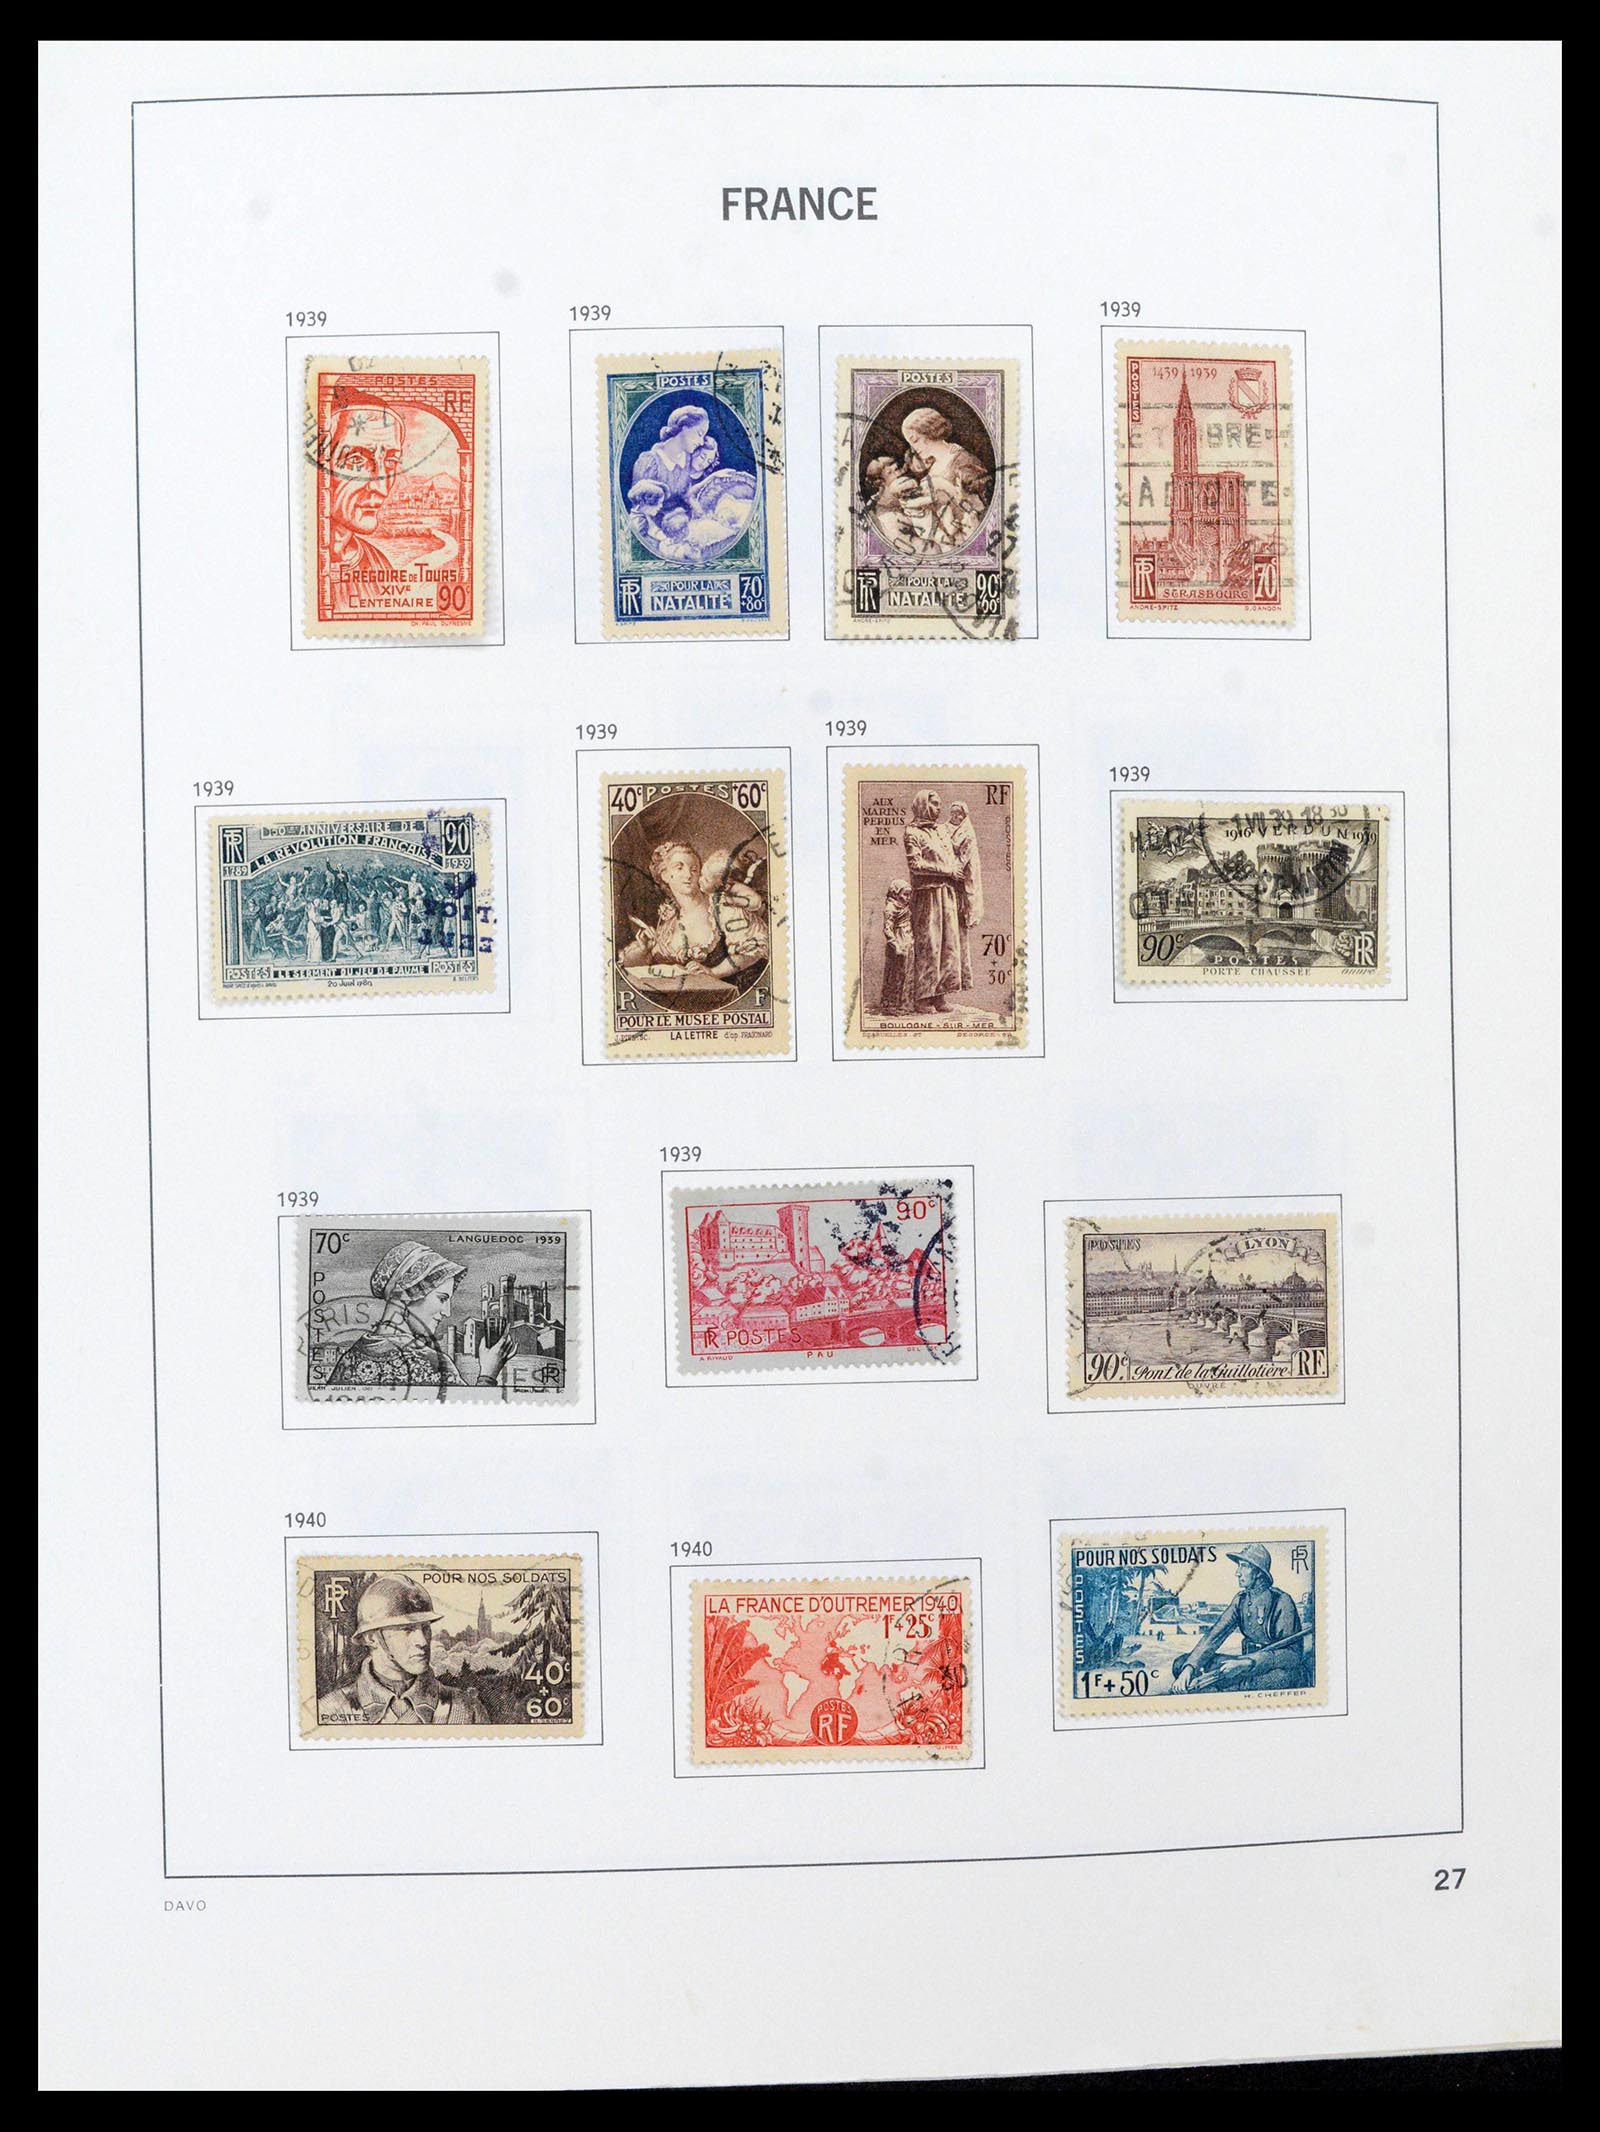 39164 0027 - Stamp collection 39164 France 1849-1981.